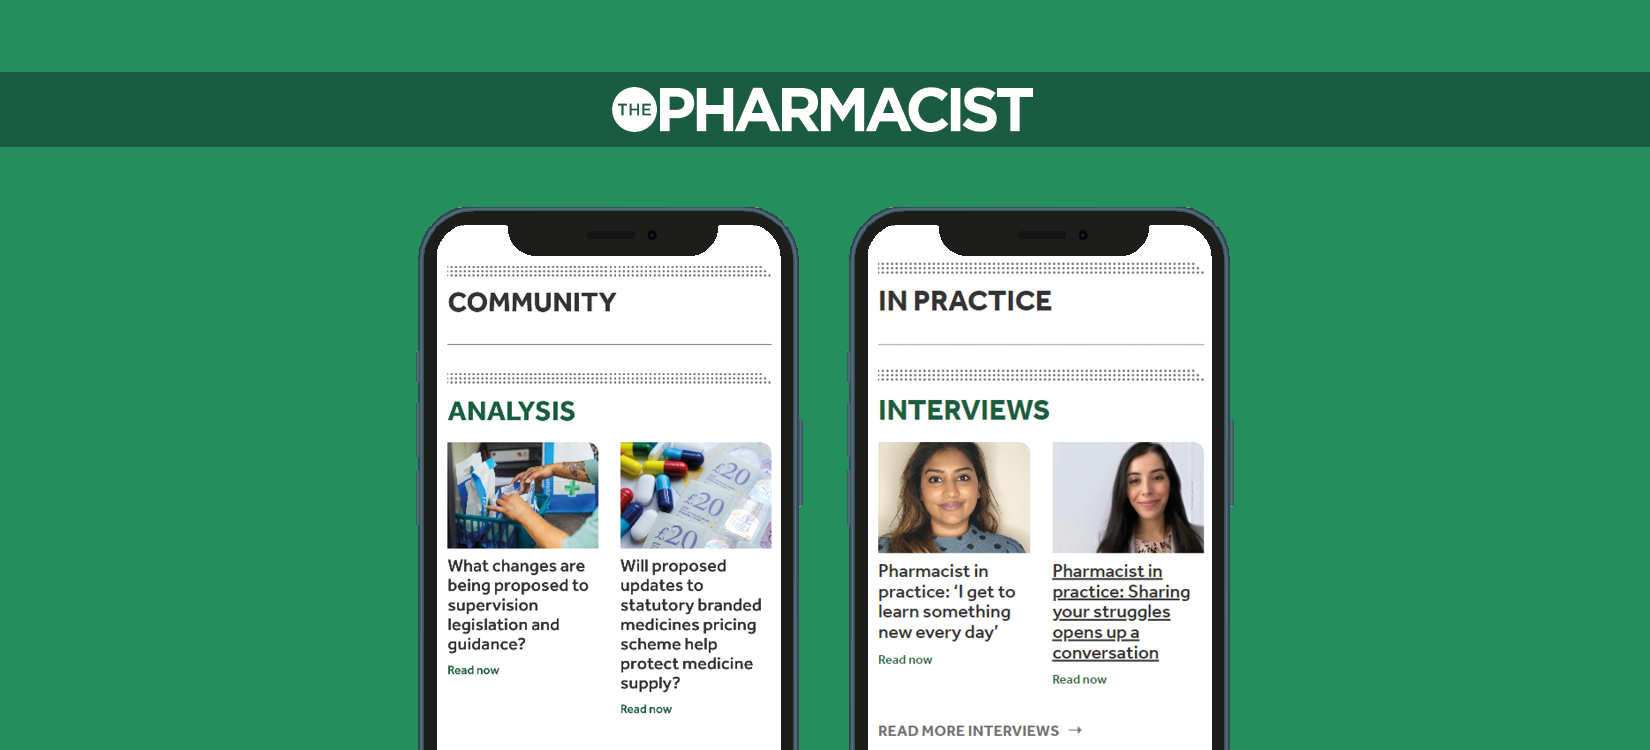 The Pharmacist: Community and In Practice